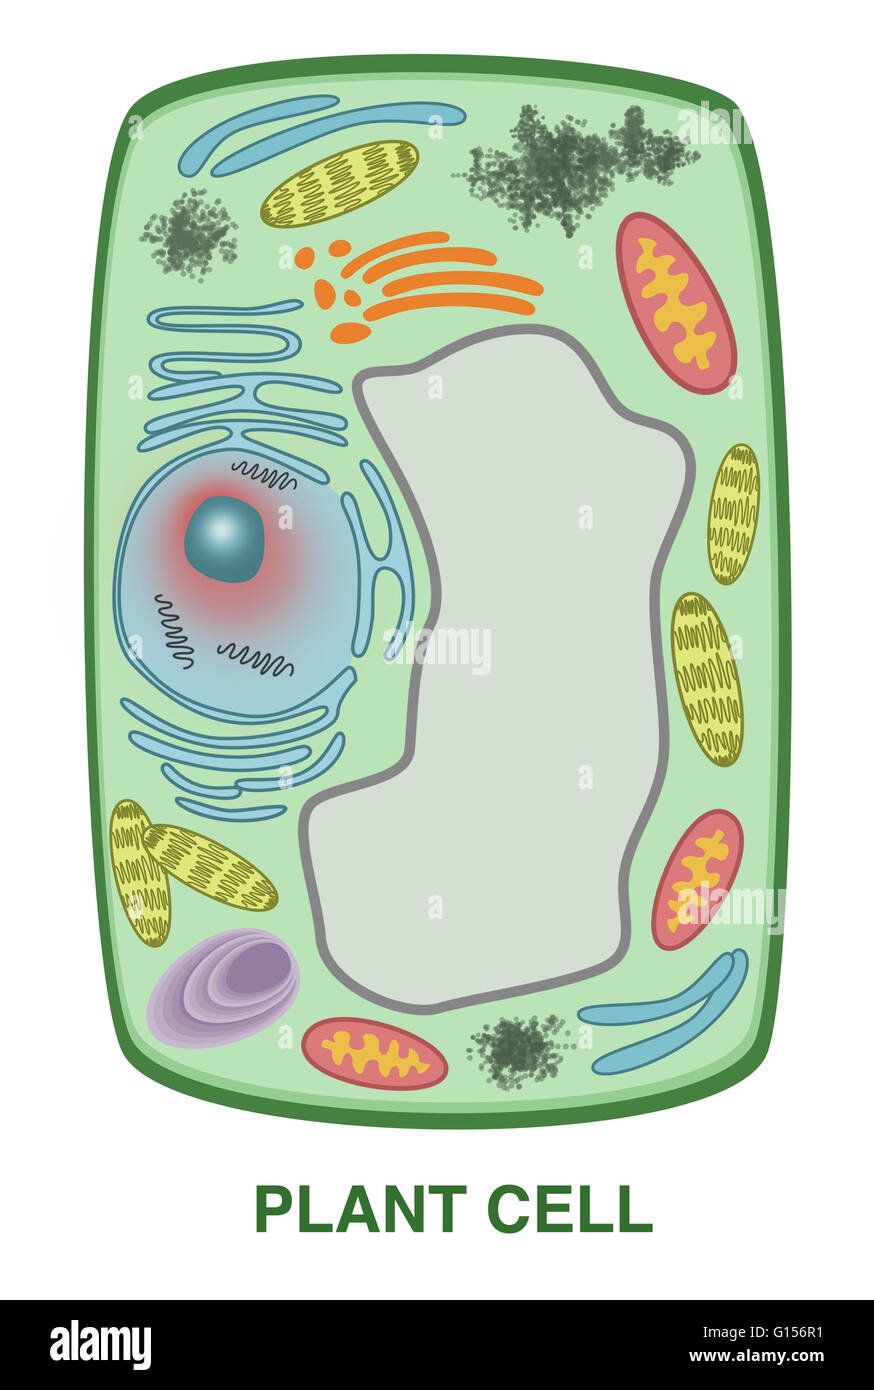 An Illustration of a plant cell. Stock Photo